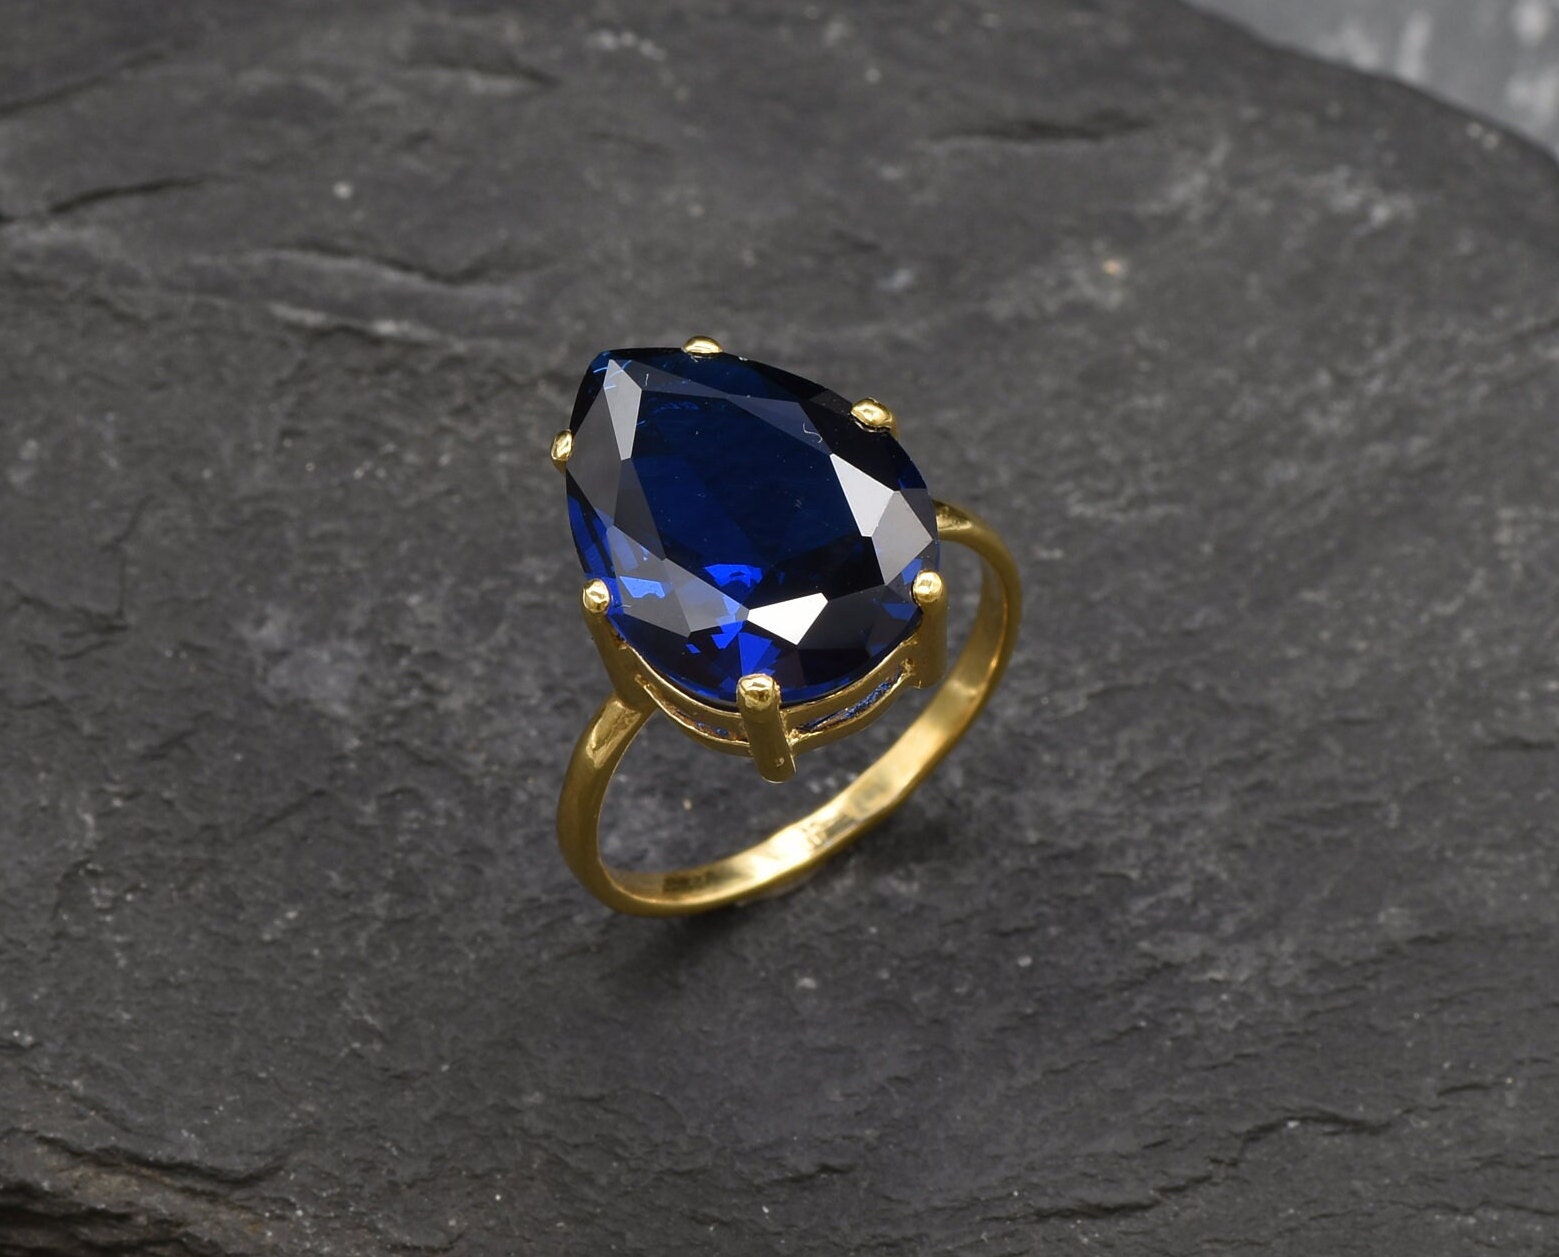 Gold Sapphire Ring, Created Sapphire, Gold Teardop Ring, Gold Pear Ring, Blue Engagement Ring, Royal Blue Ring, Vintage Ring, Vermeil Ring